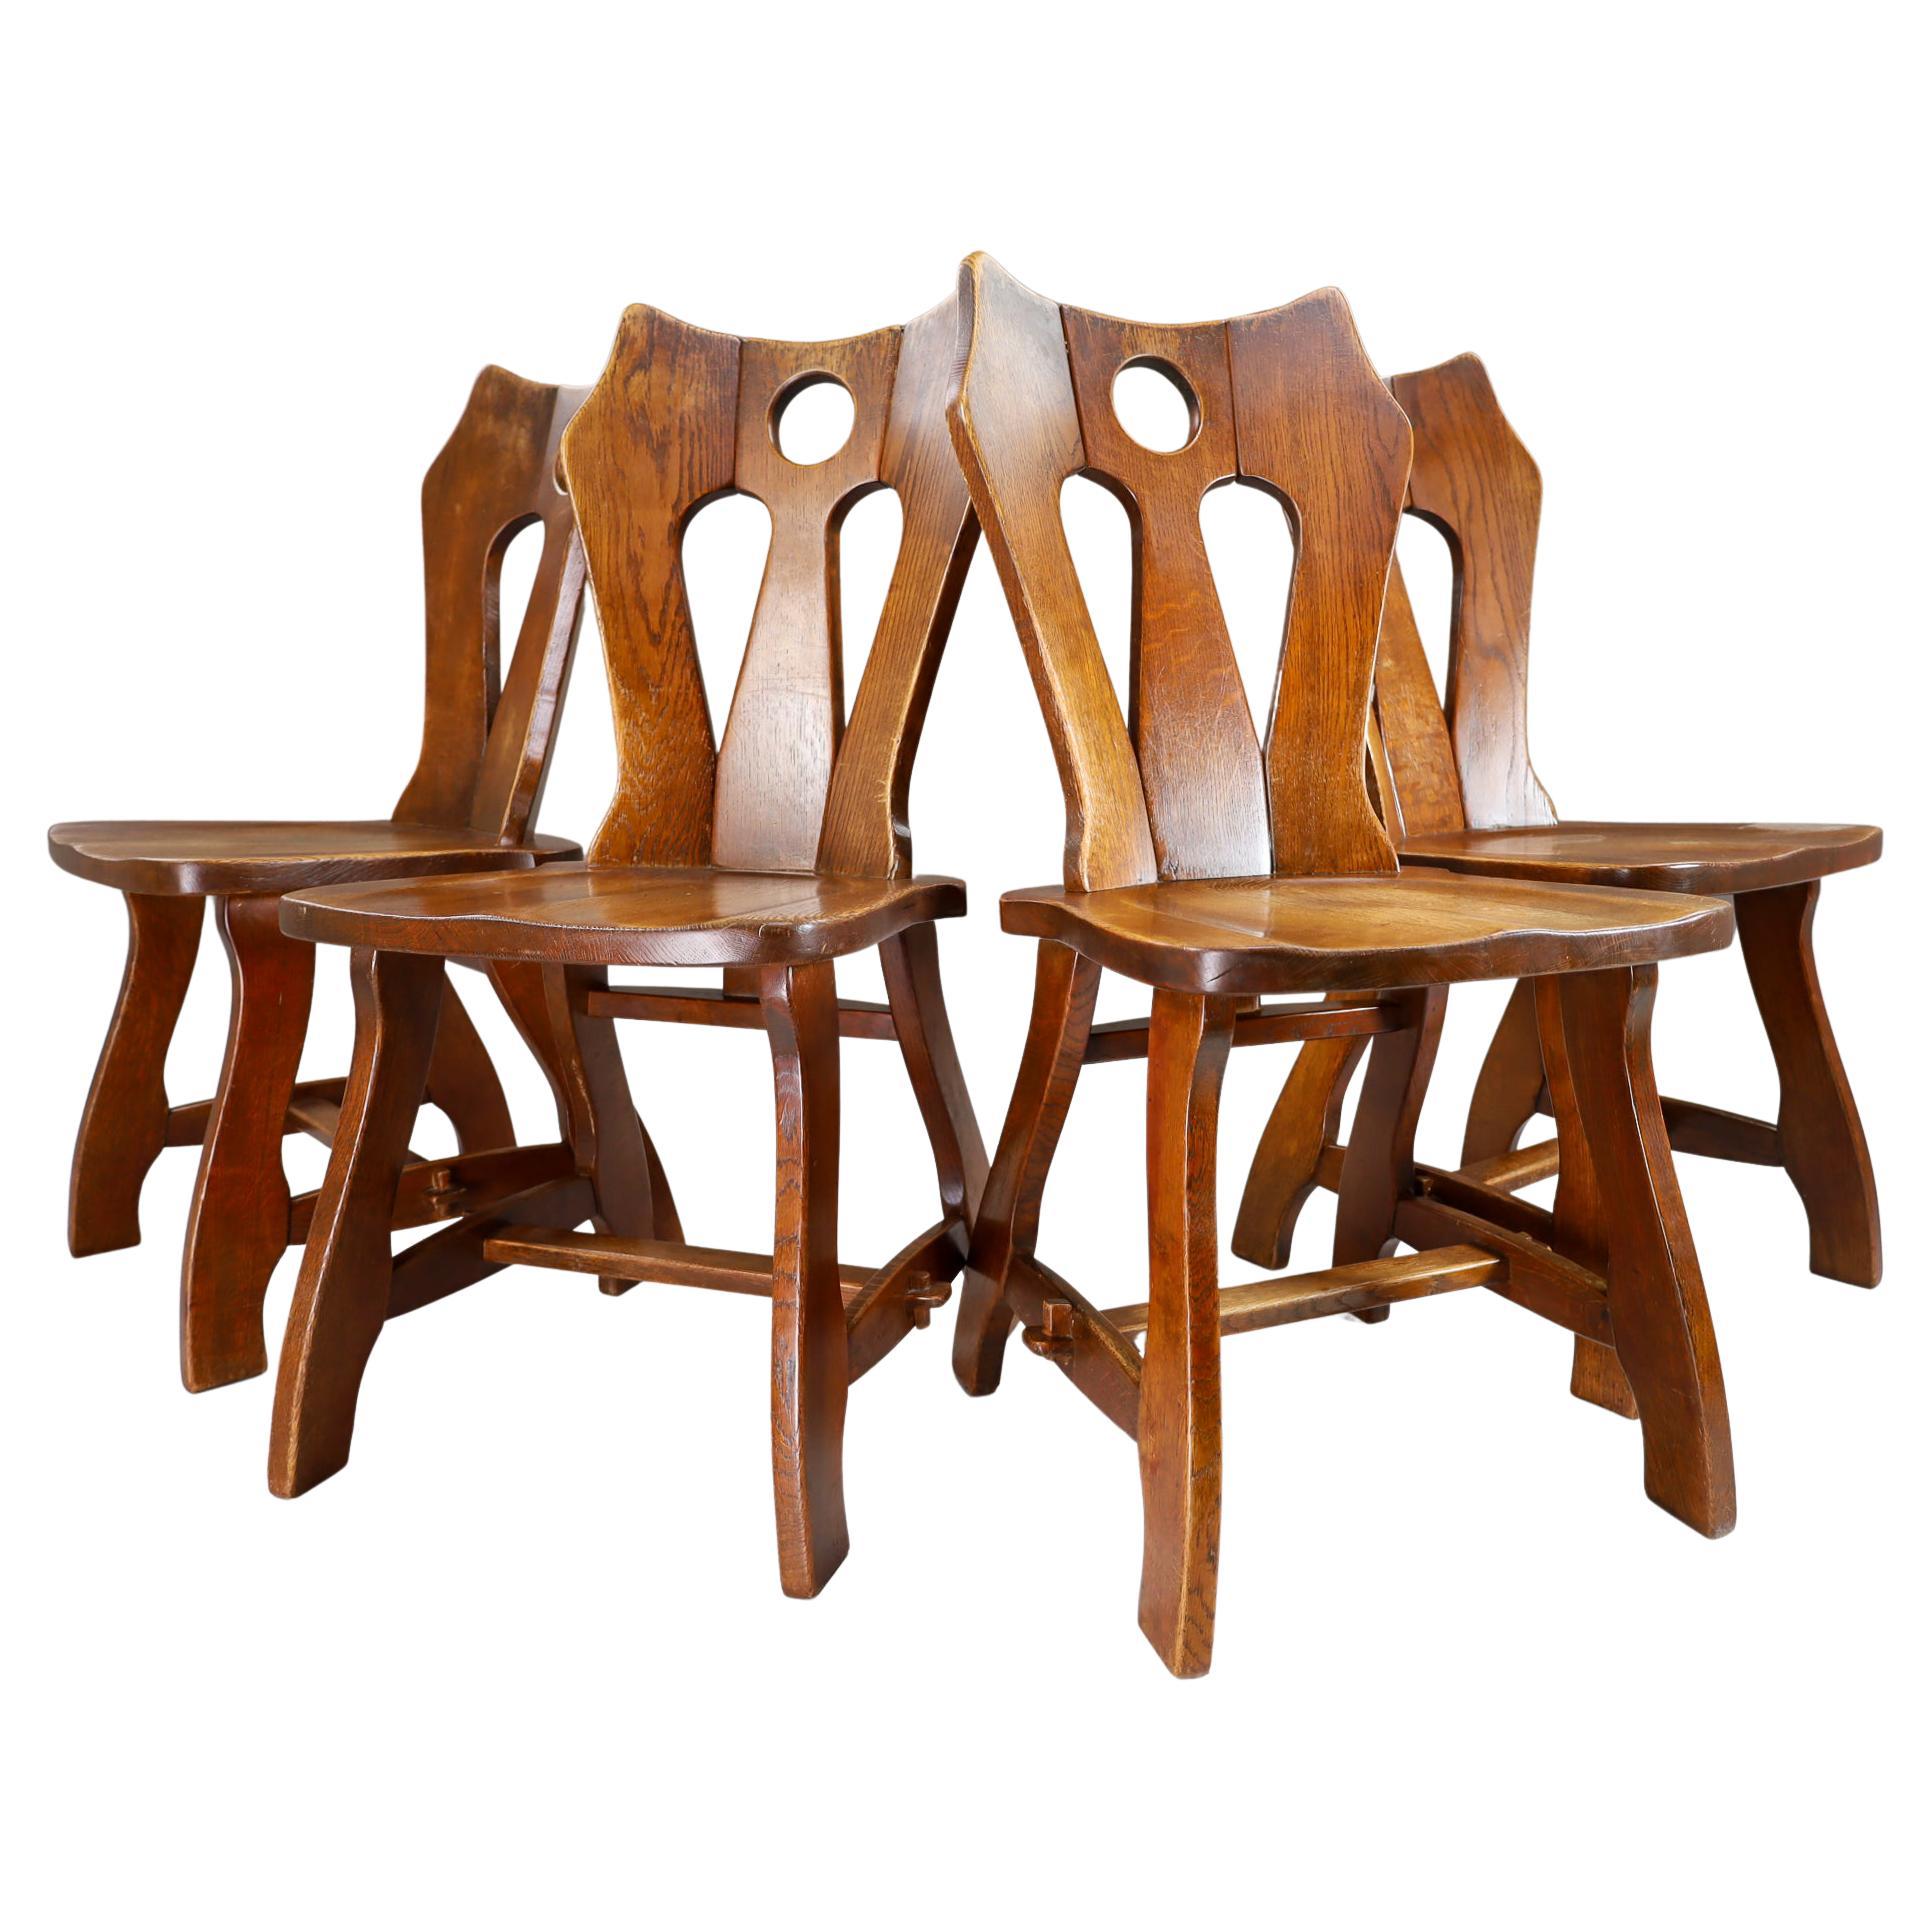 Set of Four Brutalist Chairs in Patinated Oak, Belgium, 1960s